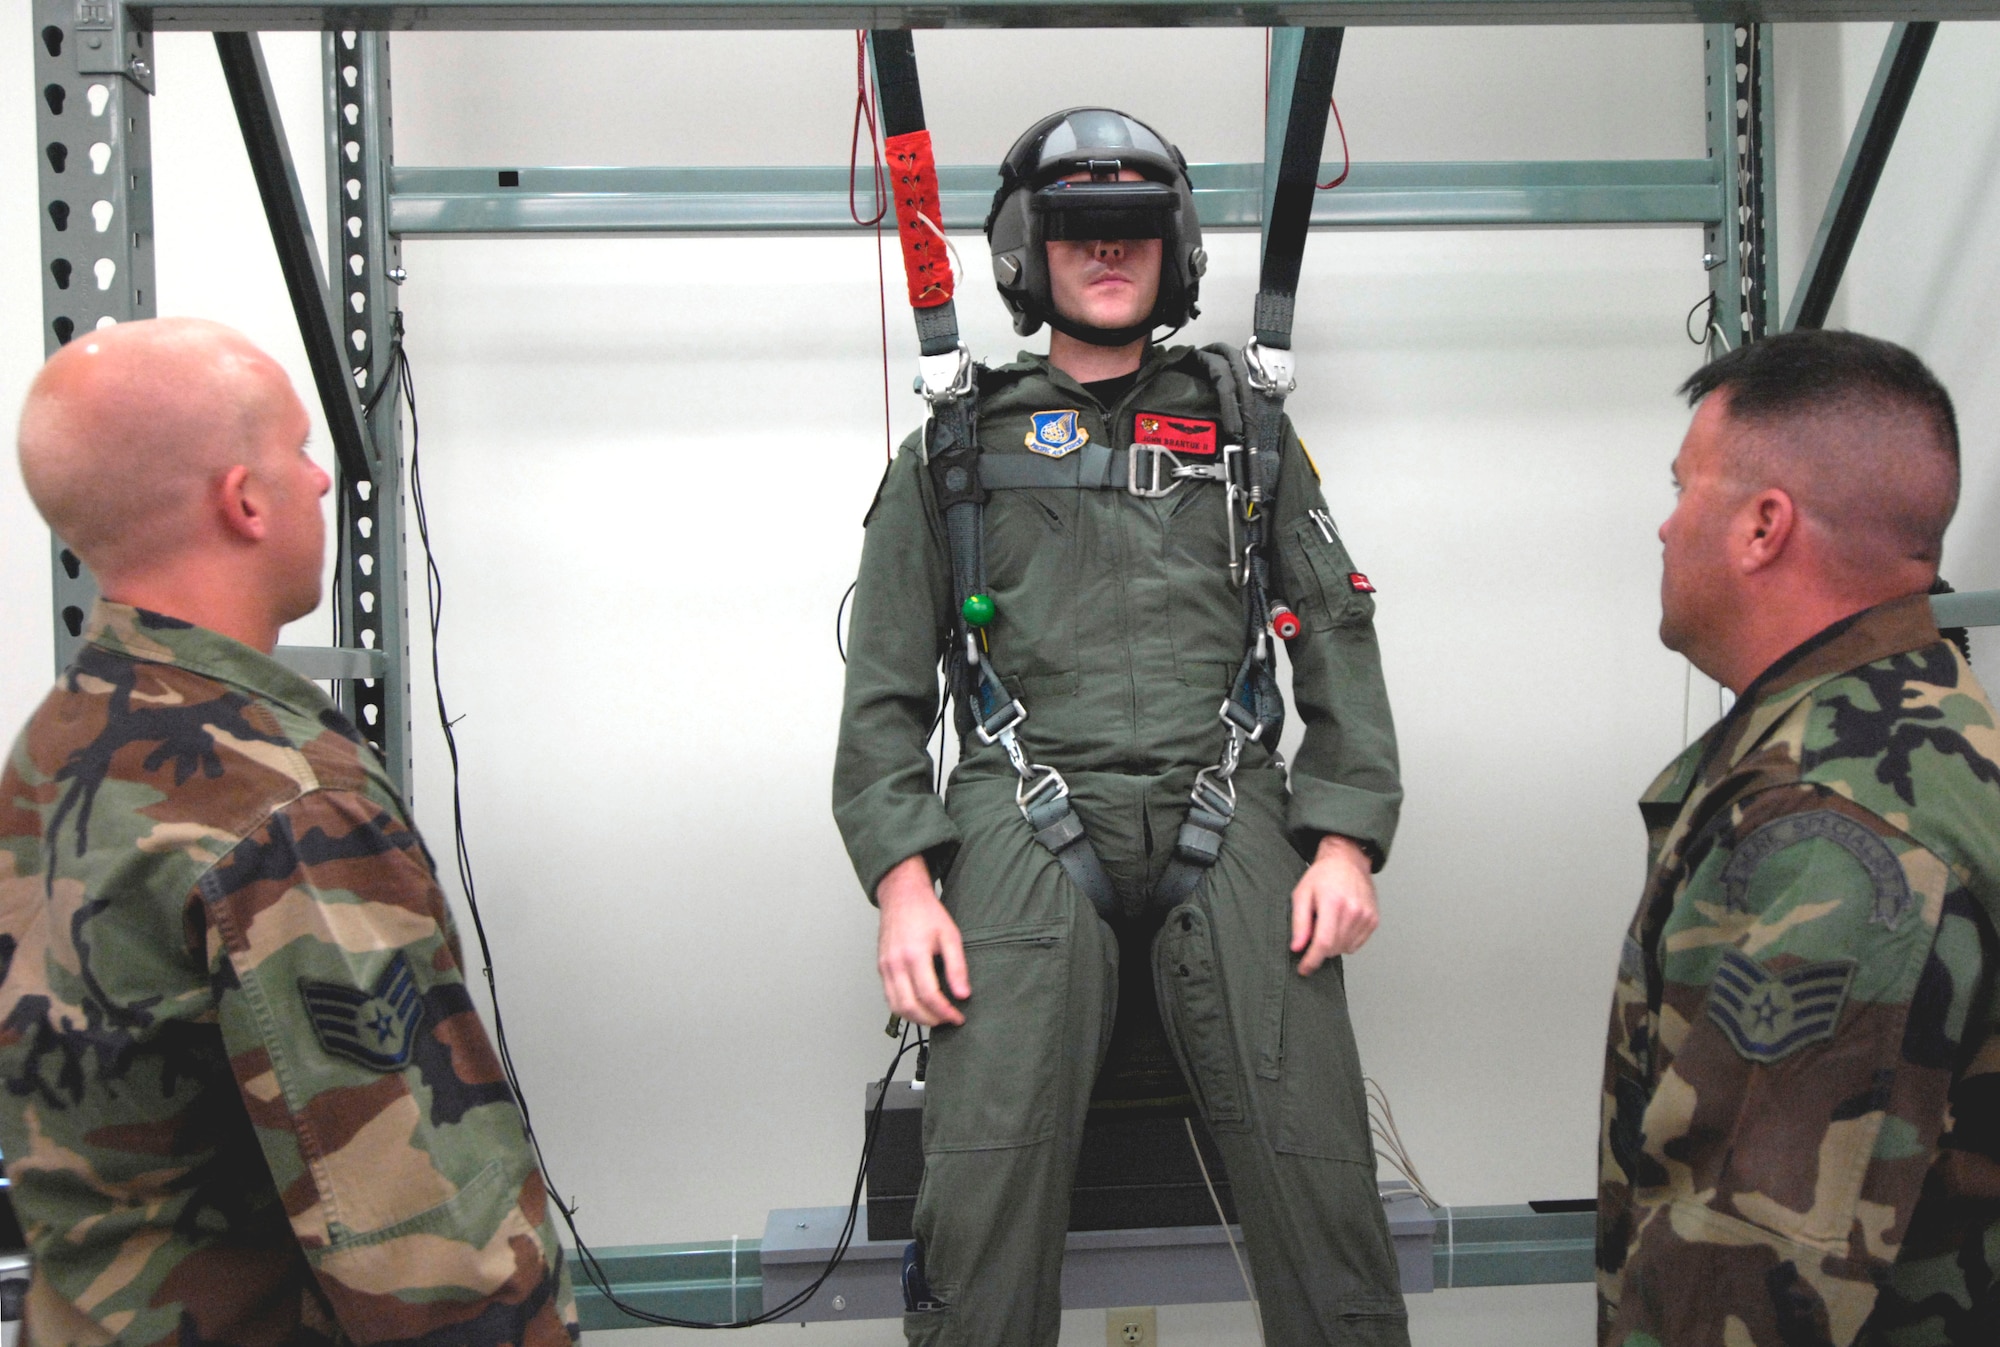 Staff Sgts. Matt Magnussen and Christopher Ferguson check with 1st Lt. John Brantuk II to make sure the virtual simulator is working before starting parachute training at Hickam Air Force Base, Hawaii, on Oct. 4. Sergeant Magnussen is a life support instructor and Sergeant Ferguson is a survival, evasion, resistance and escape instructor with the 15th Operations Support Squadron. Lieutenant Brantuk is a pilot with the 535th Airlift Squadron. (U.S. Air Force photo/Tech. Sgt. Shane A. Cuomo)
